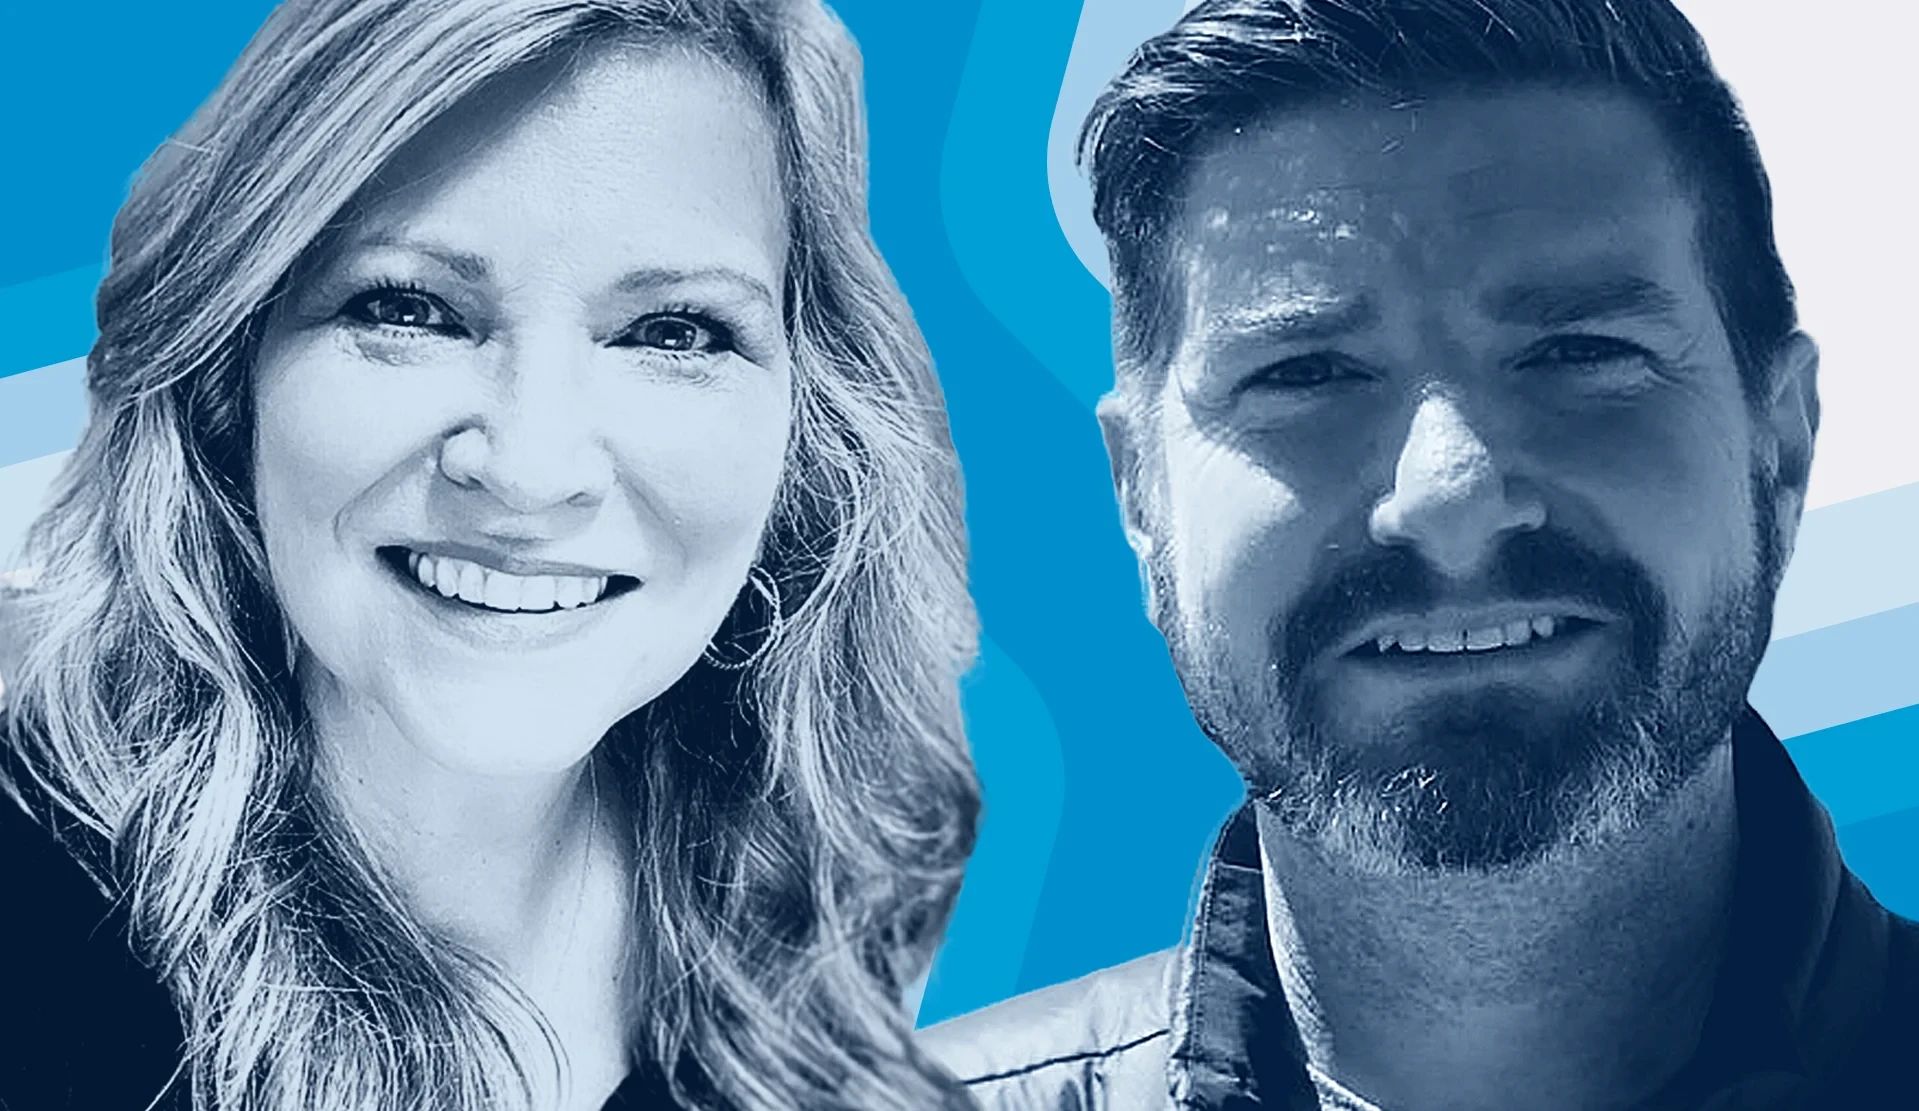 Cart.com Expands Senior Leadership Team with Two New Appointments